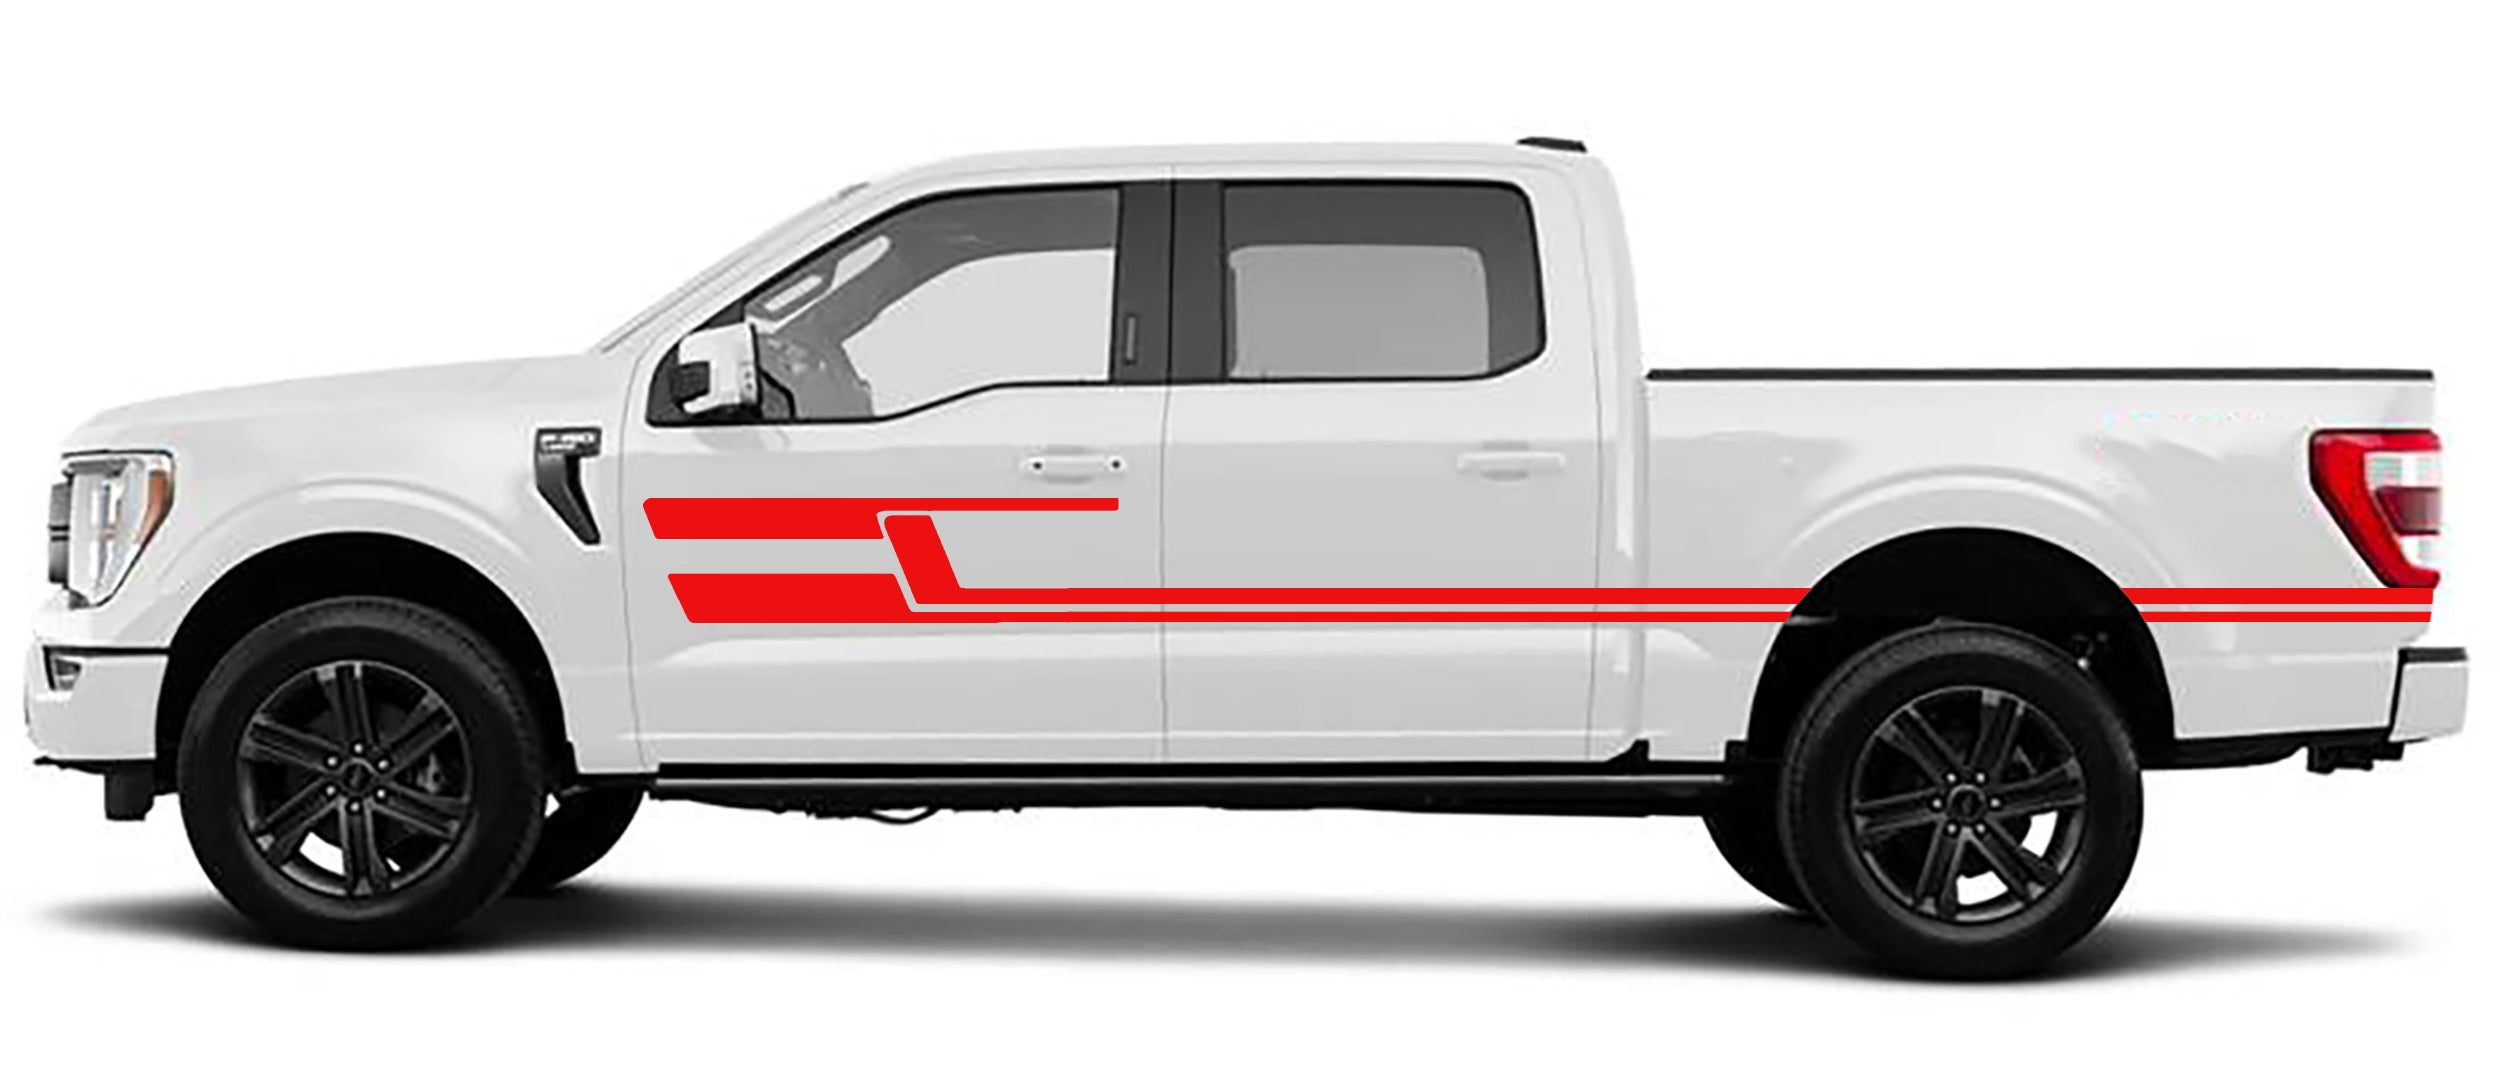 upper door vinyl stripes graphics for ford f 150 2021 to 2023 models red